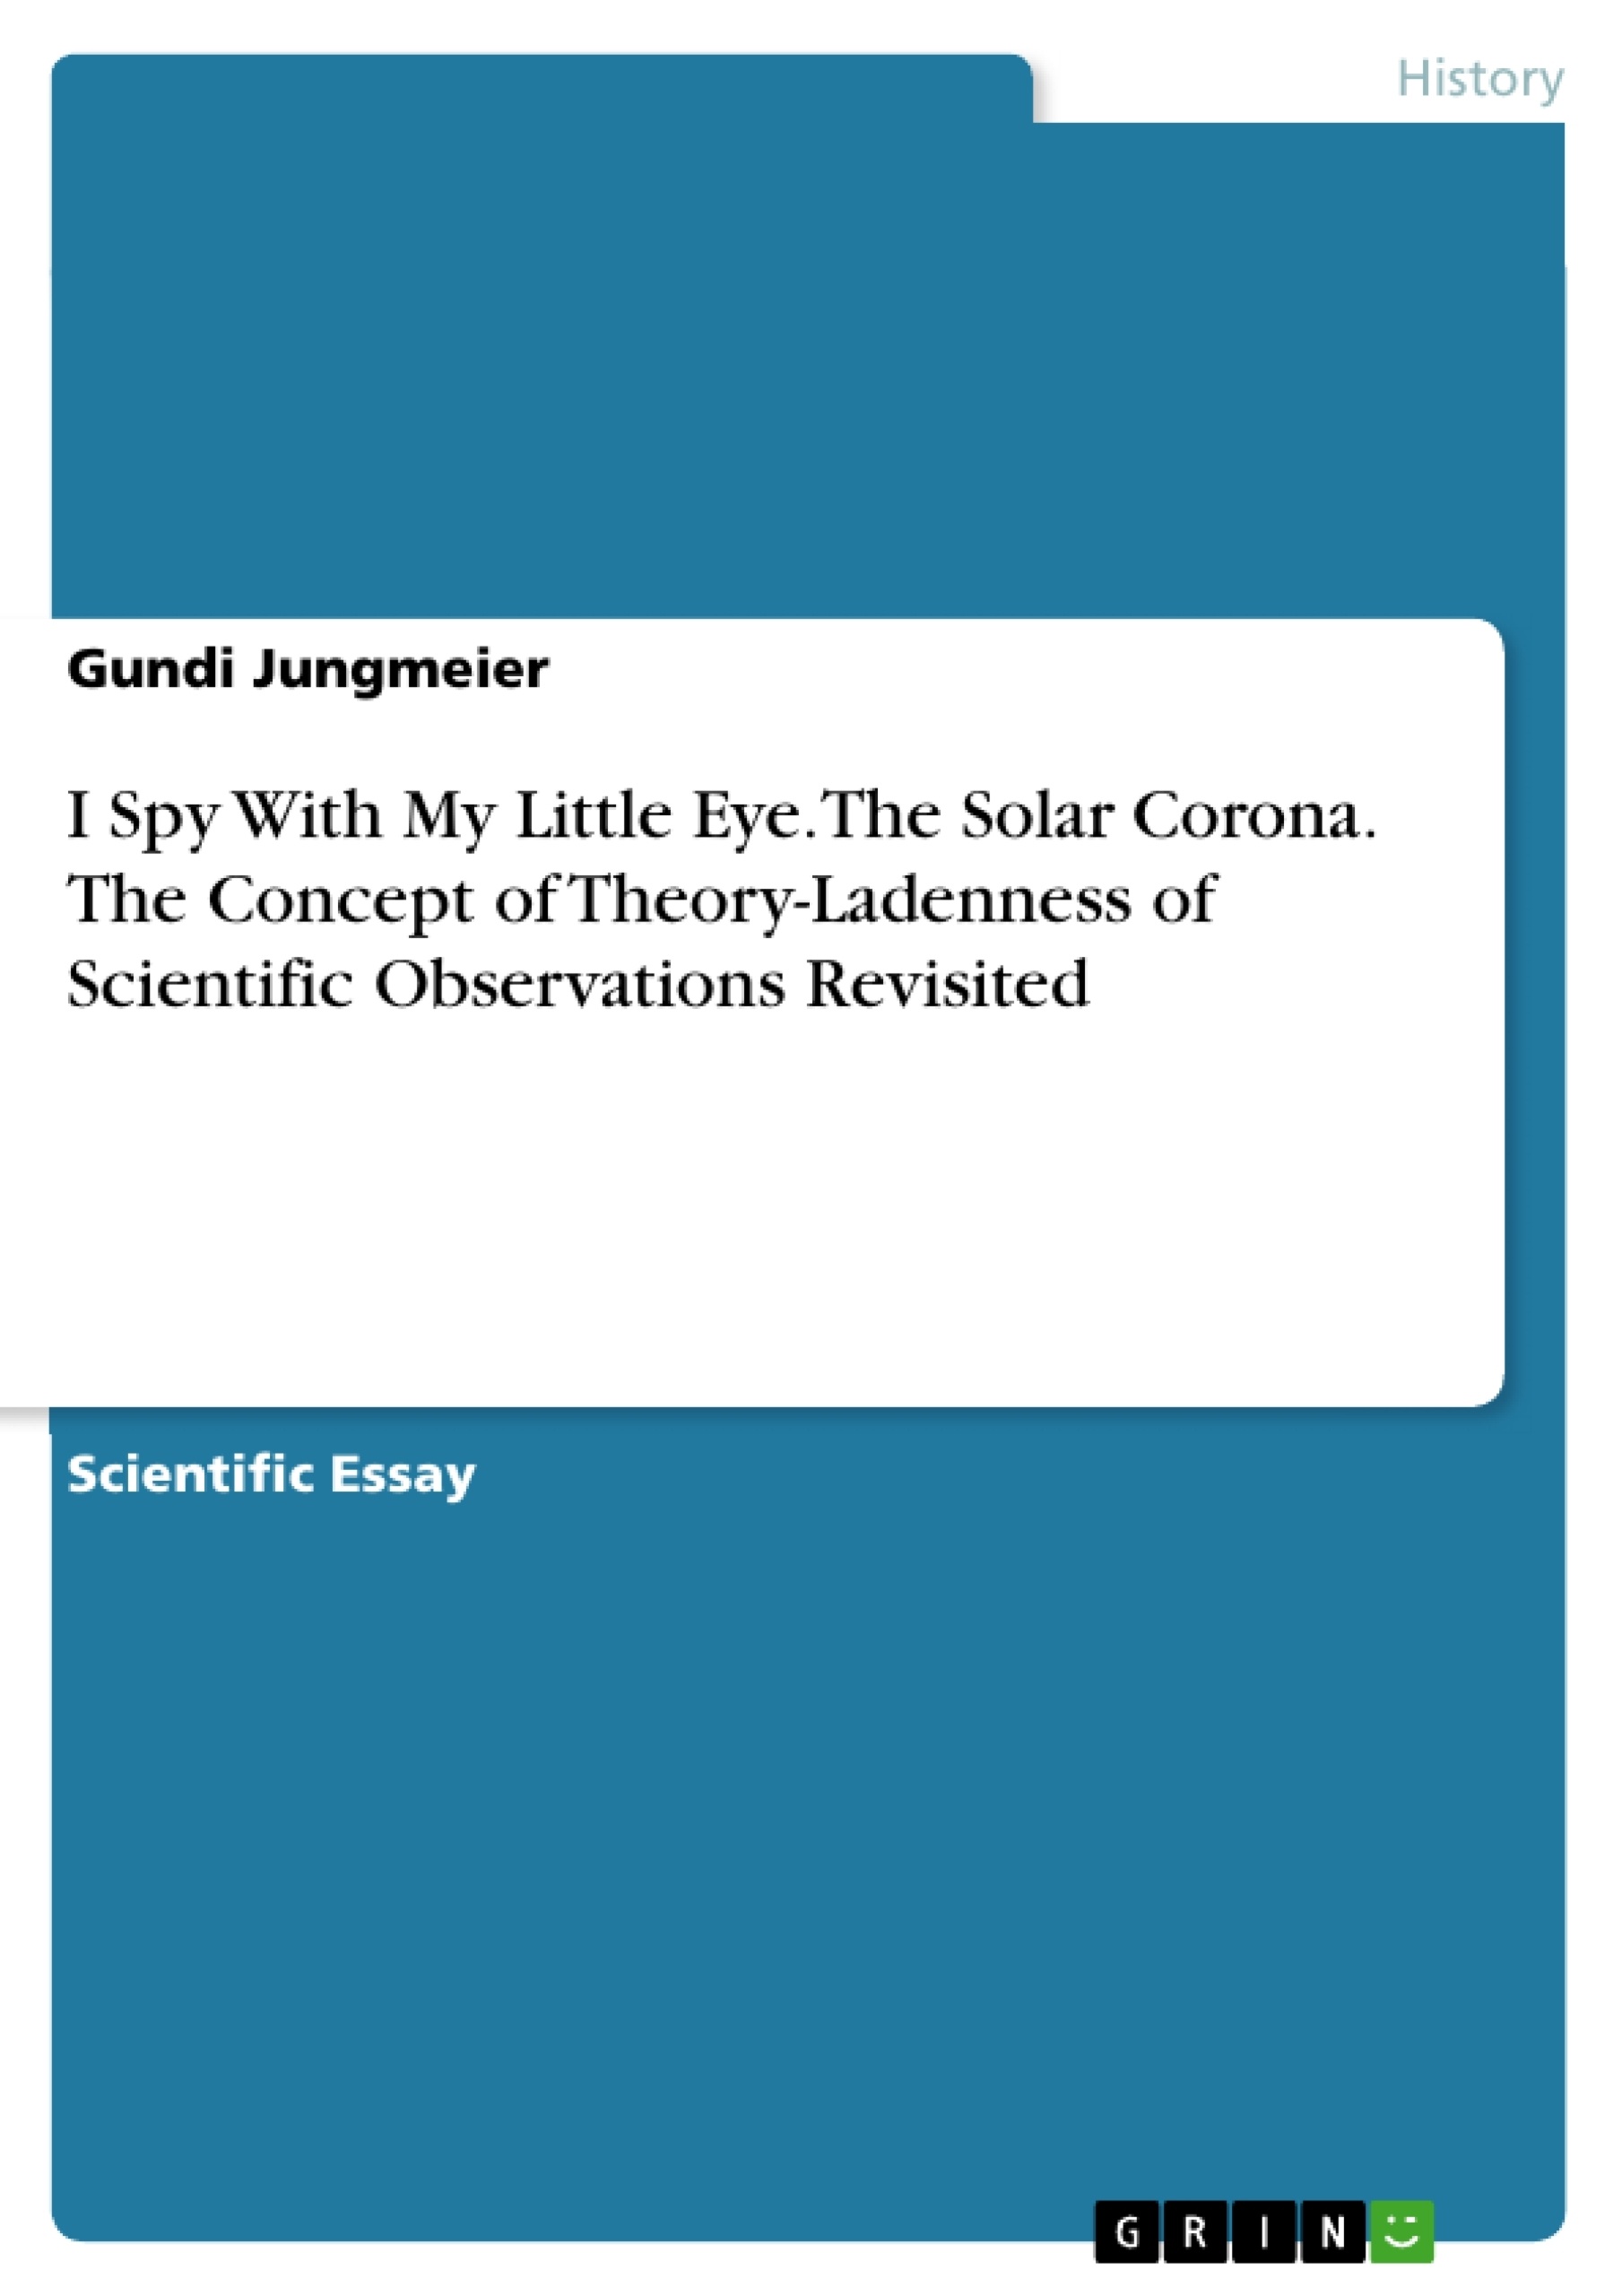 Titel: I Spy With My Little Eye. The Solar Corona. The Concept of Theory-Ladenness of Scientific Observations Revisited